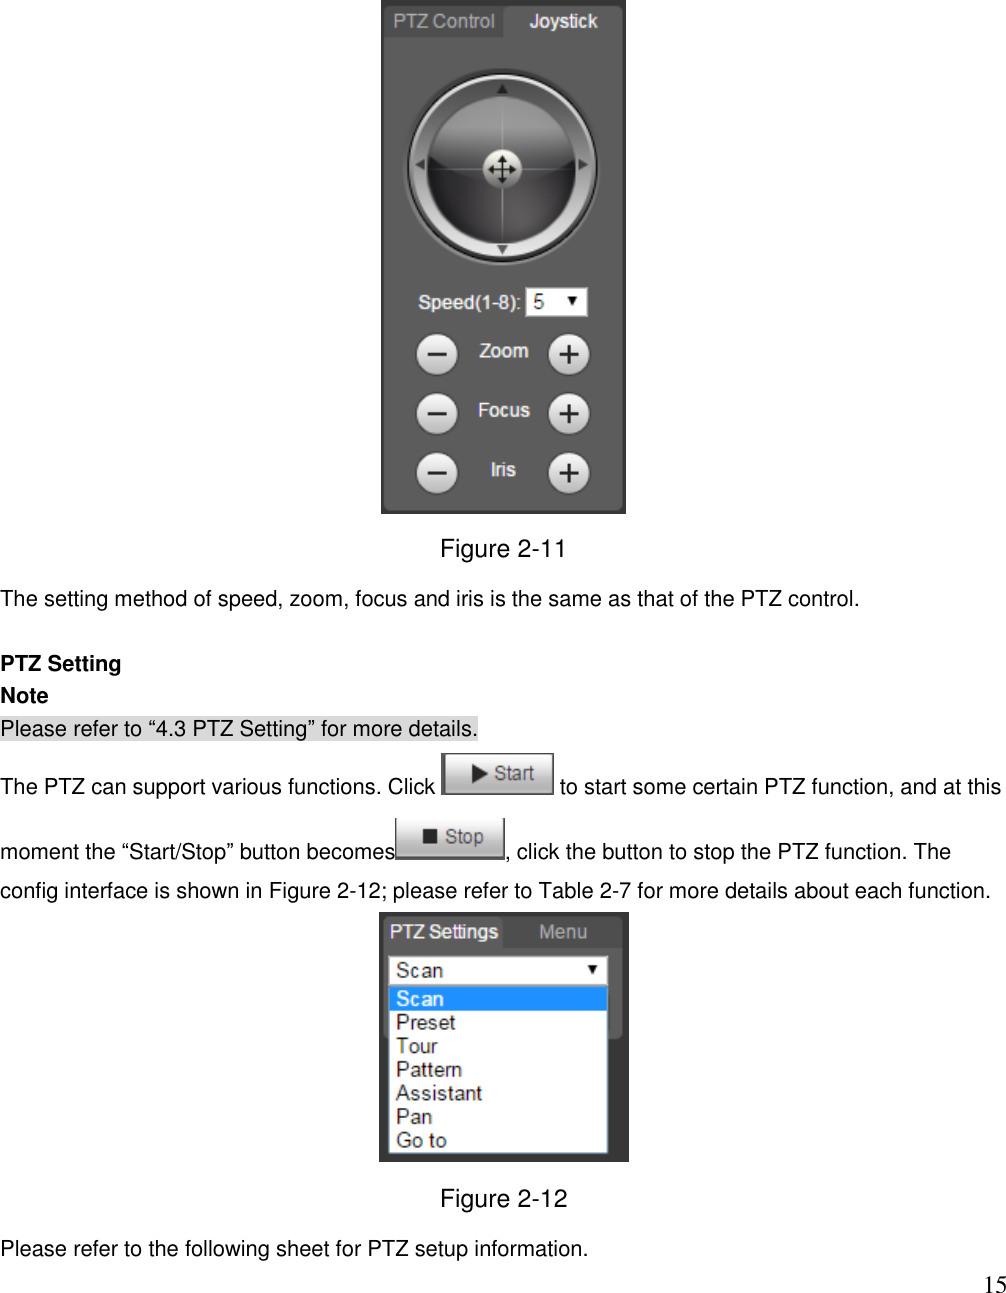                                                                              15  Figure 2-11 The setting method of speed, zoom, focus and iris is the same as that of the PTZ control.   PTZ Setting Note Please refer to “4.3 PTZ Setting” for more details. The PTZ can support various functions. Click   to start some certain PTZ function, and at this moment the “Start/Stop” button becomes , click the button to stop the PTZ function. The config interface is shown in Figure 2-12; please refer to Table 2-7 for more details about each function.  Figure 2-12 Please refer to the following sheet for PTZ setup information.  